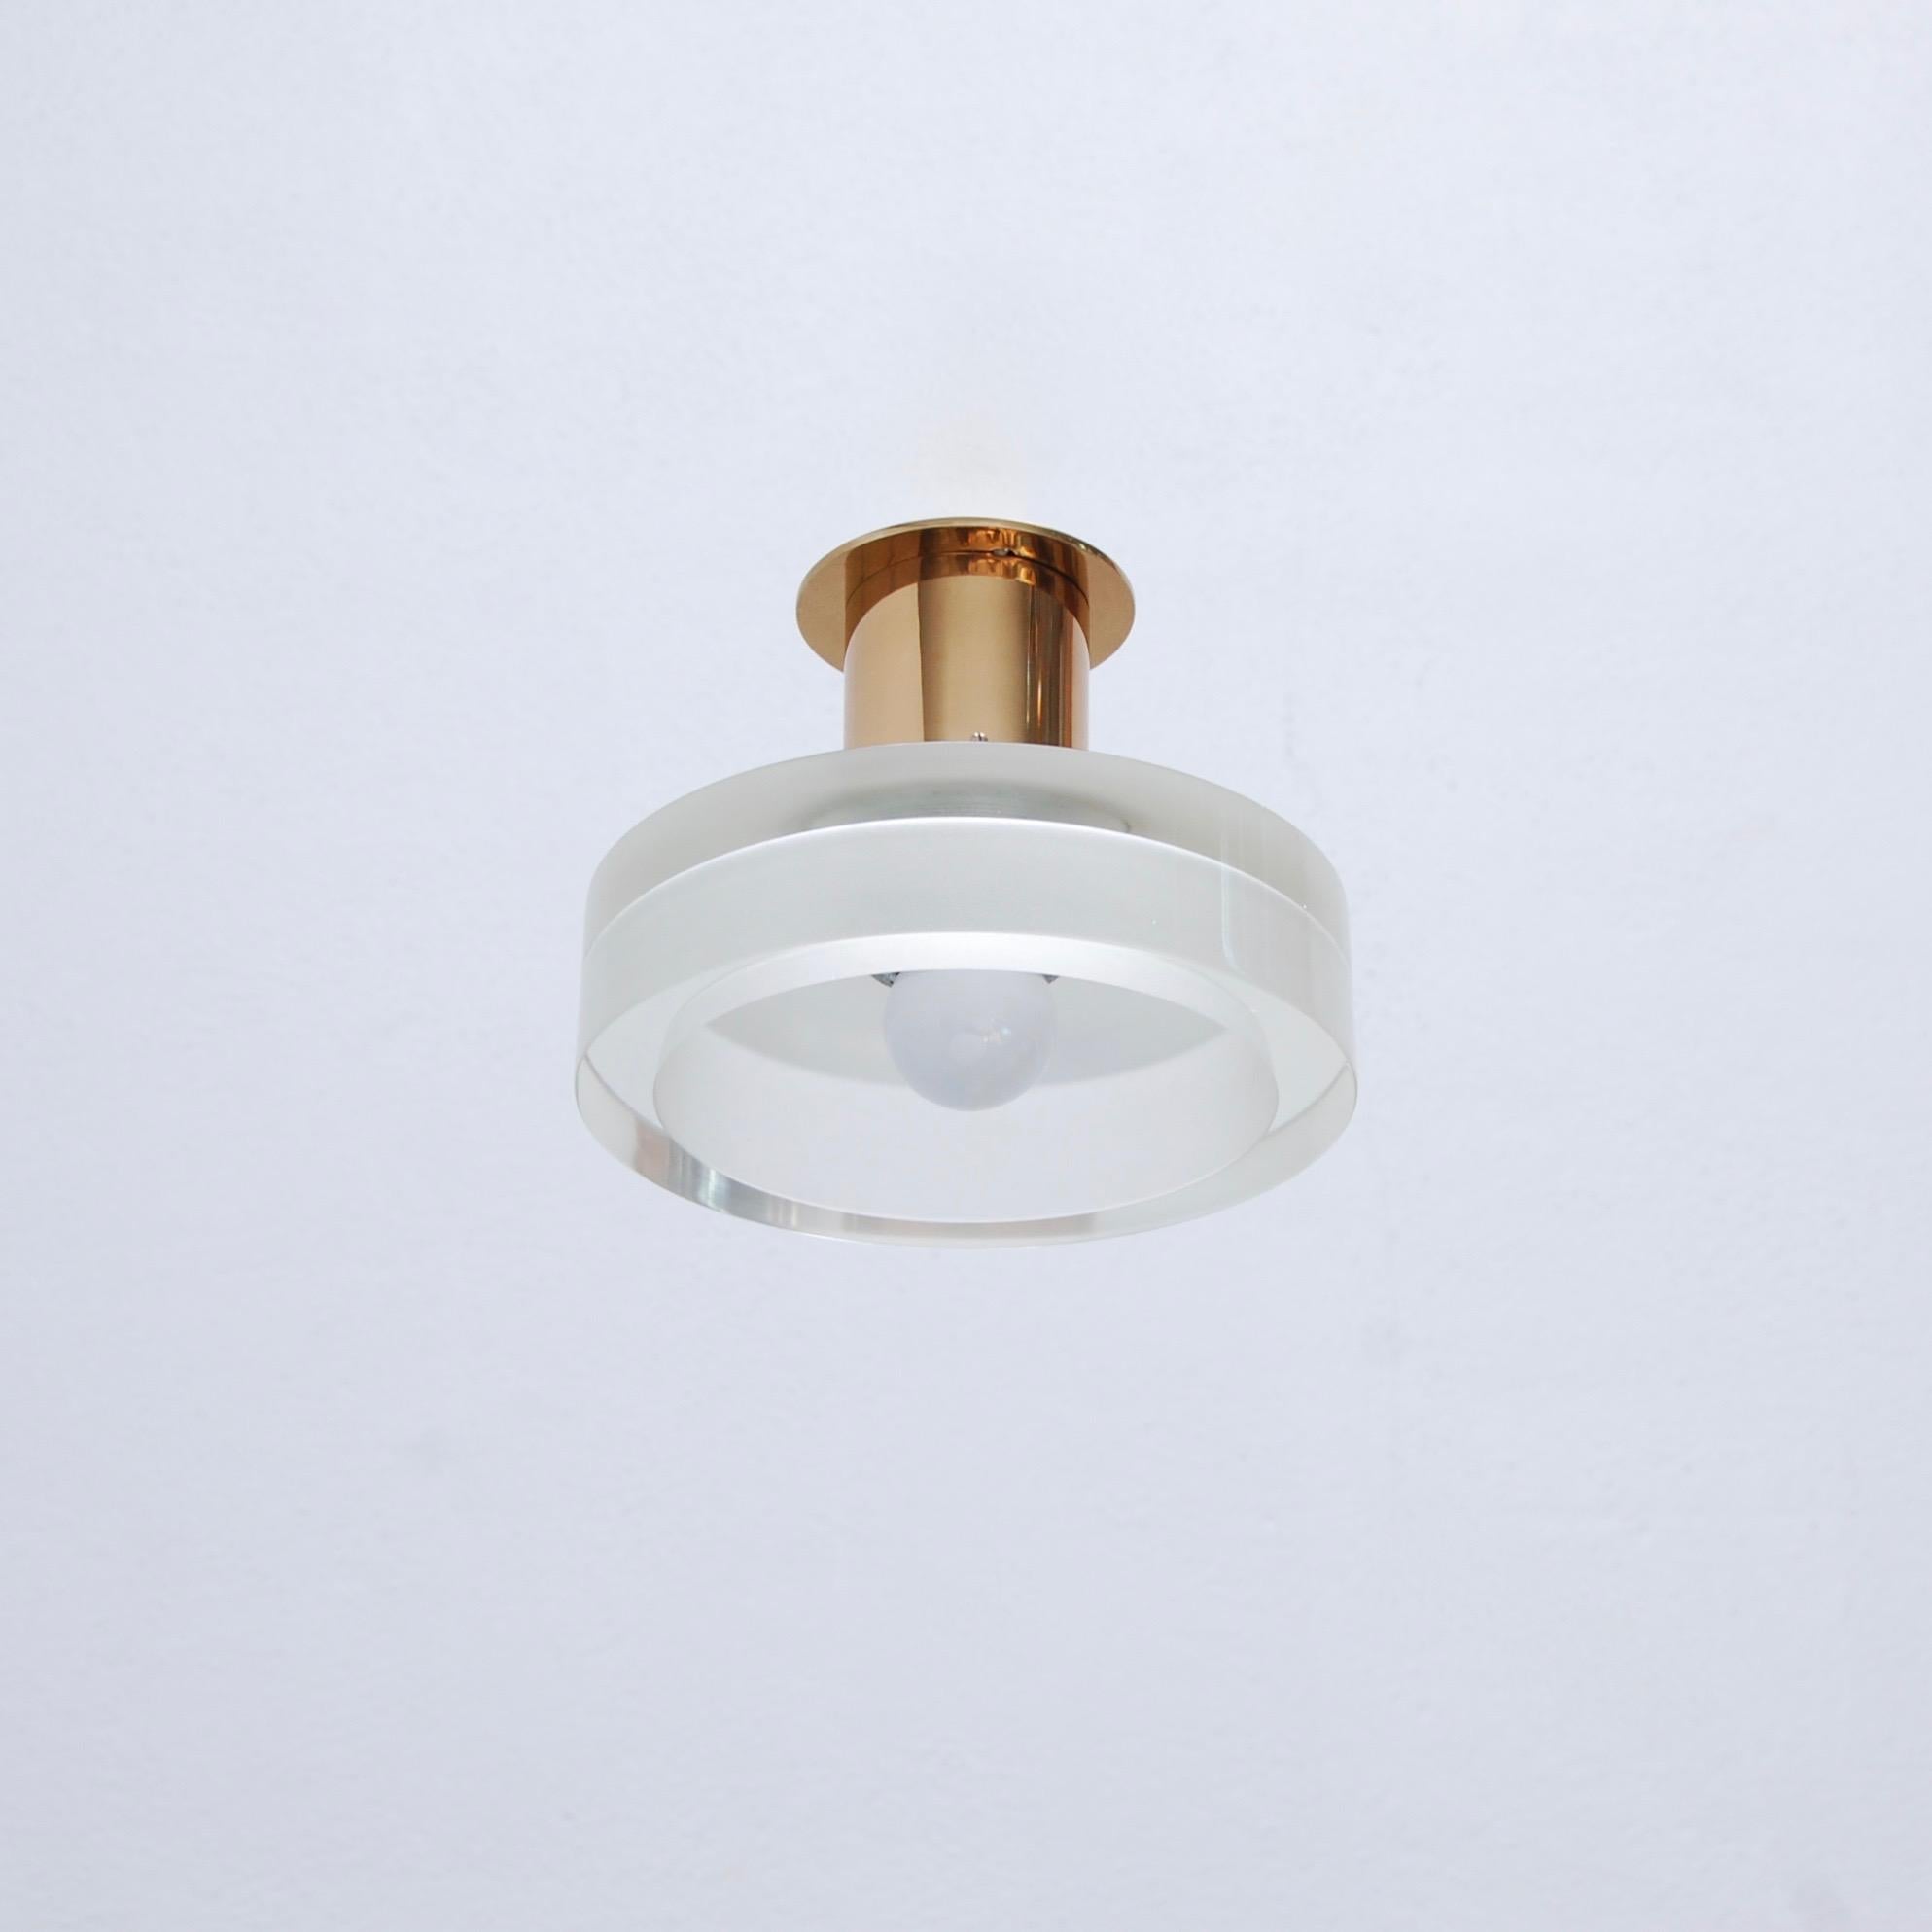 Single classical Seguso Ceiling fixture from mid century Italy in champagne color glass and brass. Partially restored. (1) E26 medium based socket. In brass and glass. Light bulb included. 
Measurements:
Height: 6.5”
Diameter: 8.75”.
   